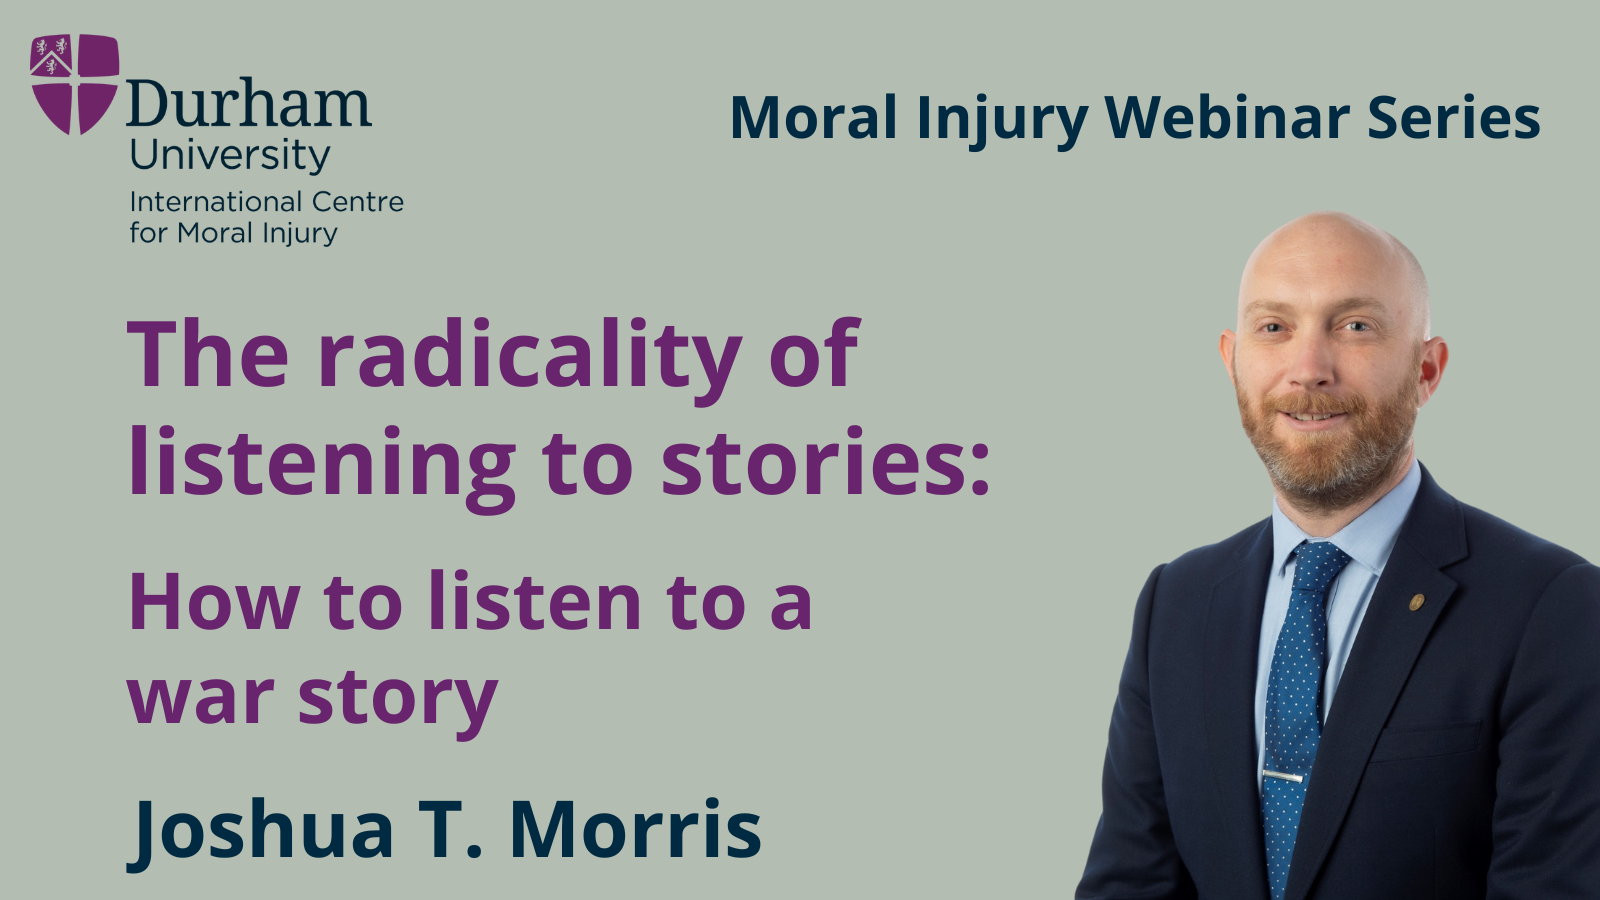 The radicality of listening to stories: How to listen to a war story, by Joshua T. Morris